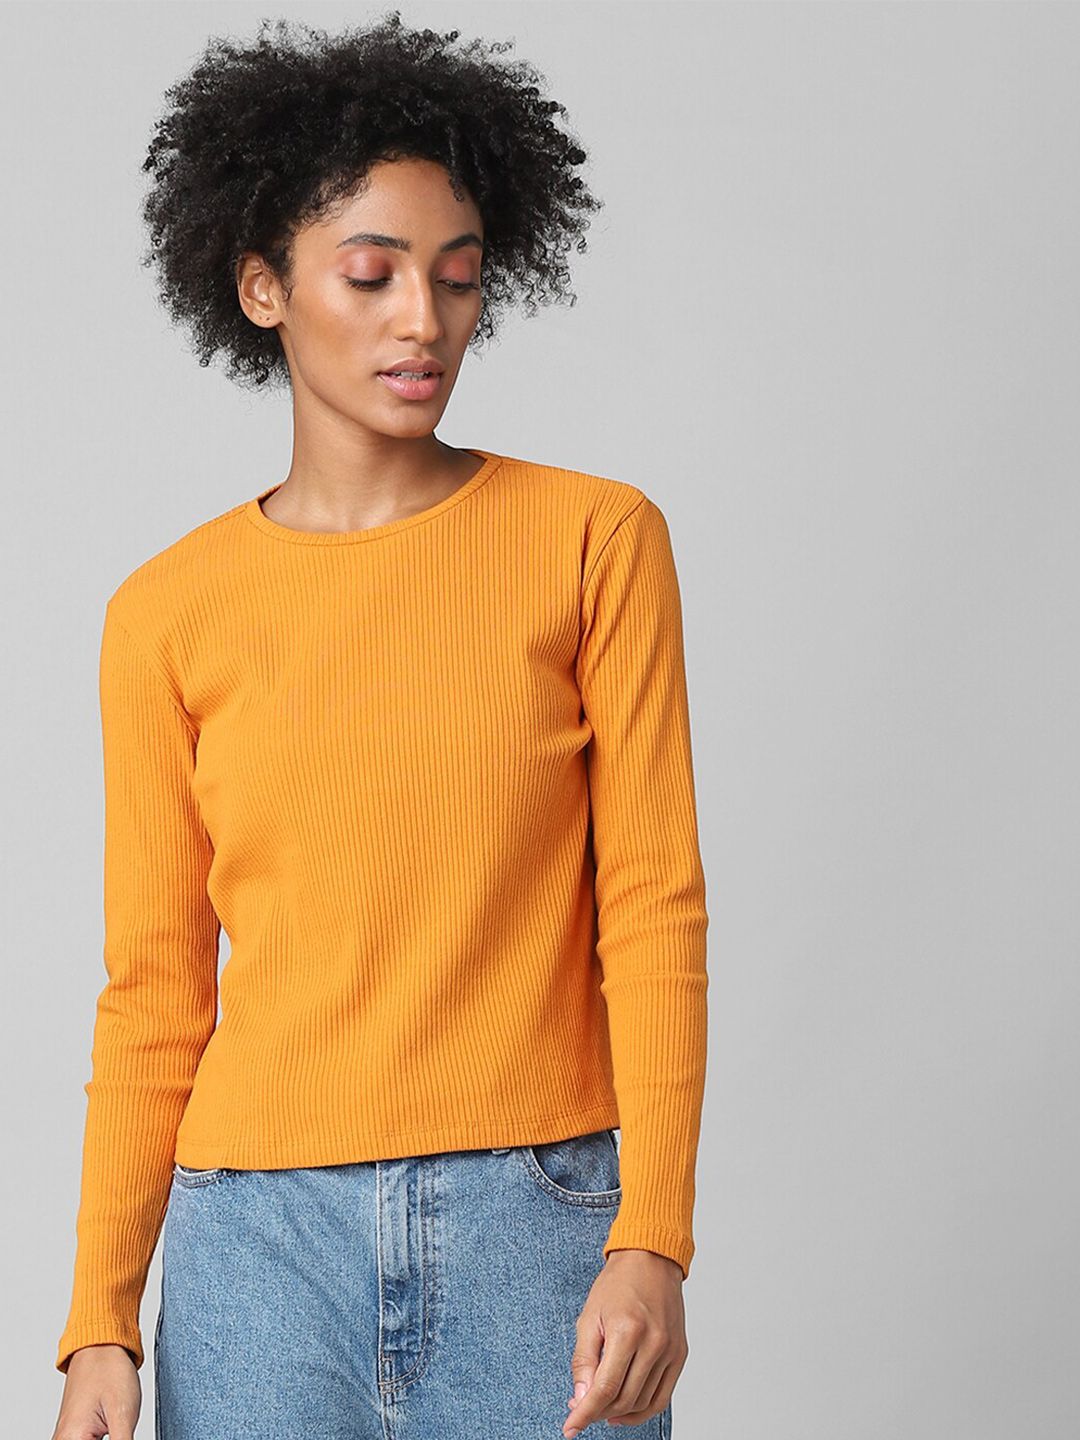 ONLY Women solid Orange Top Price in India